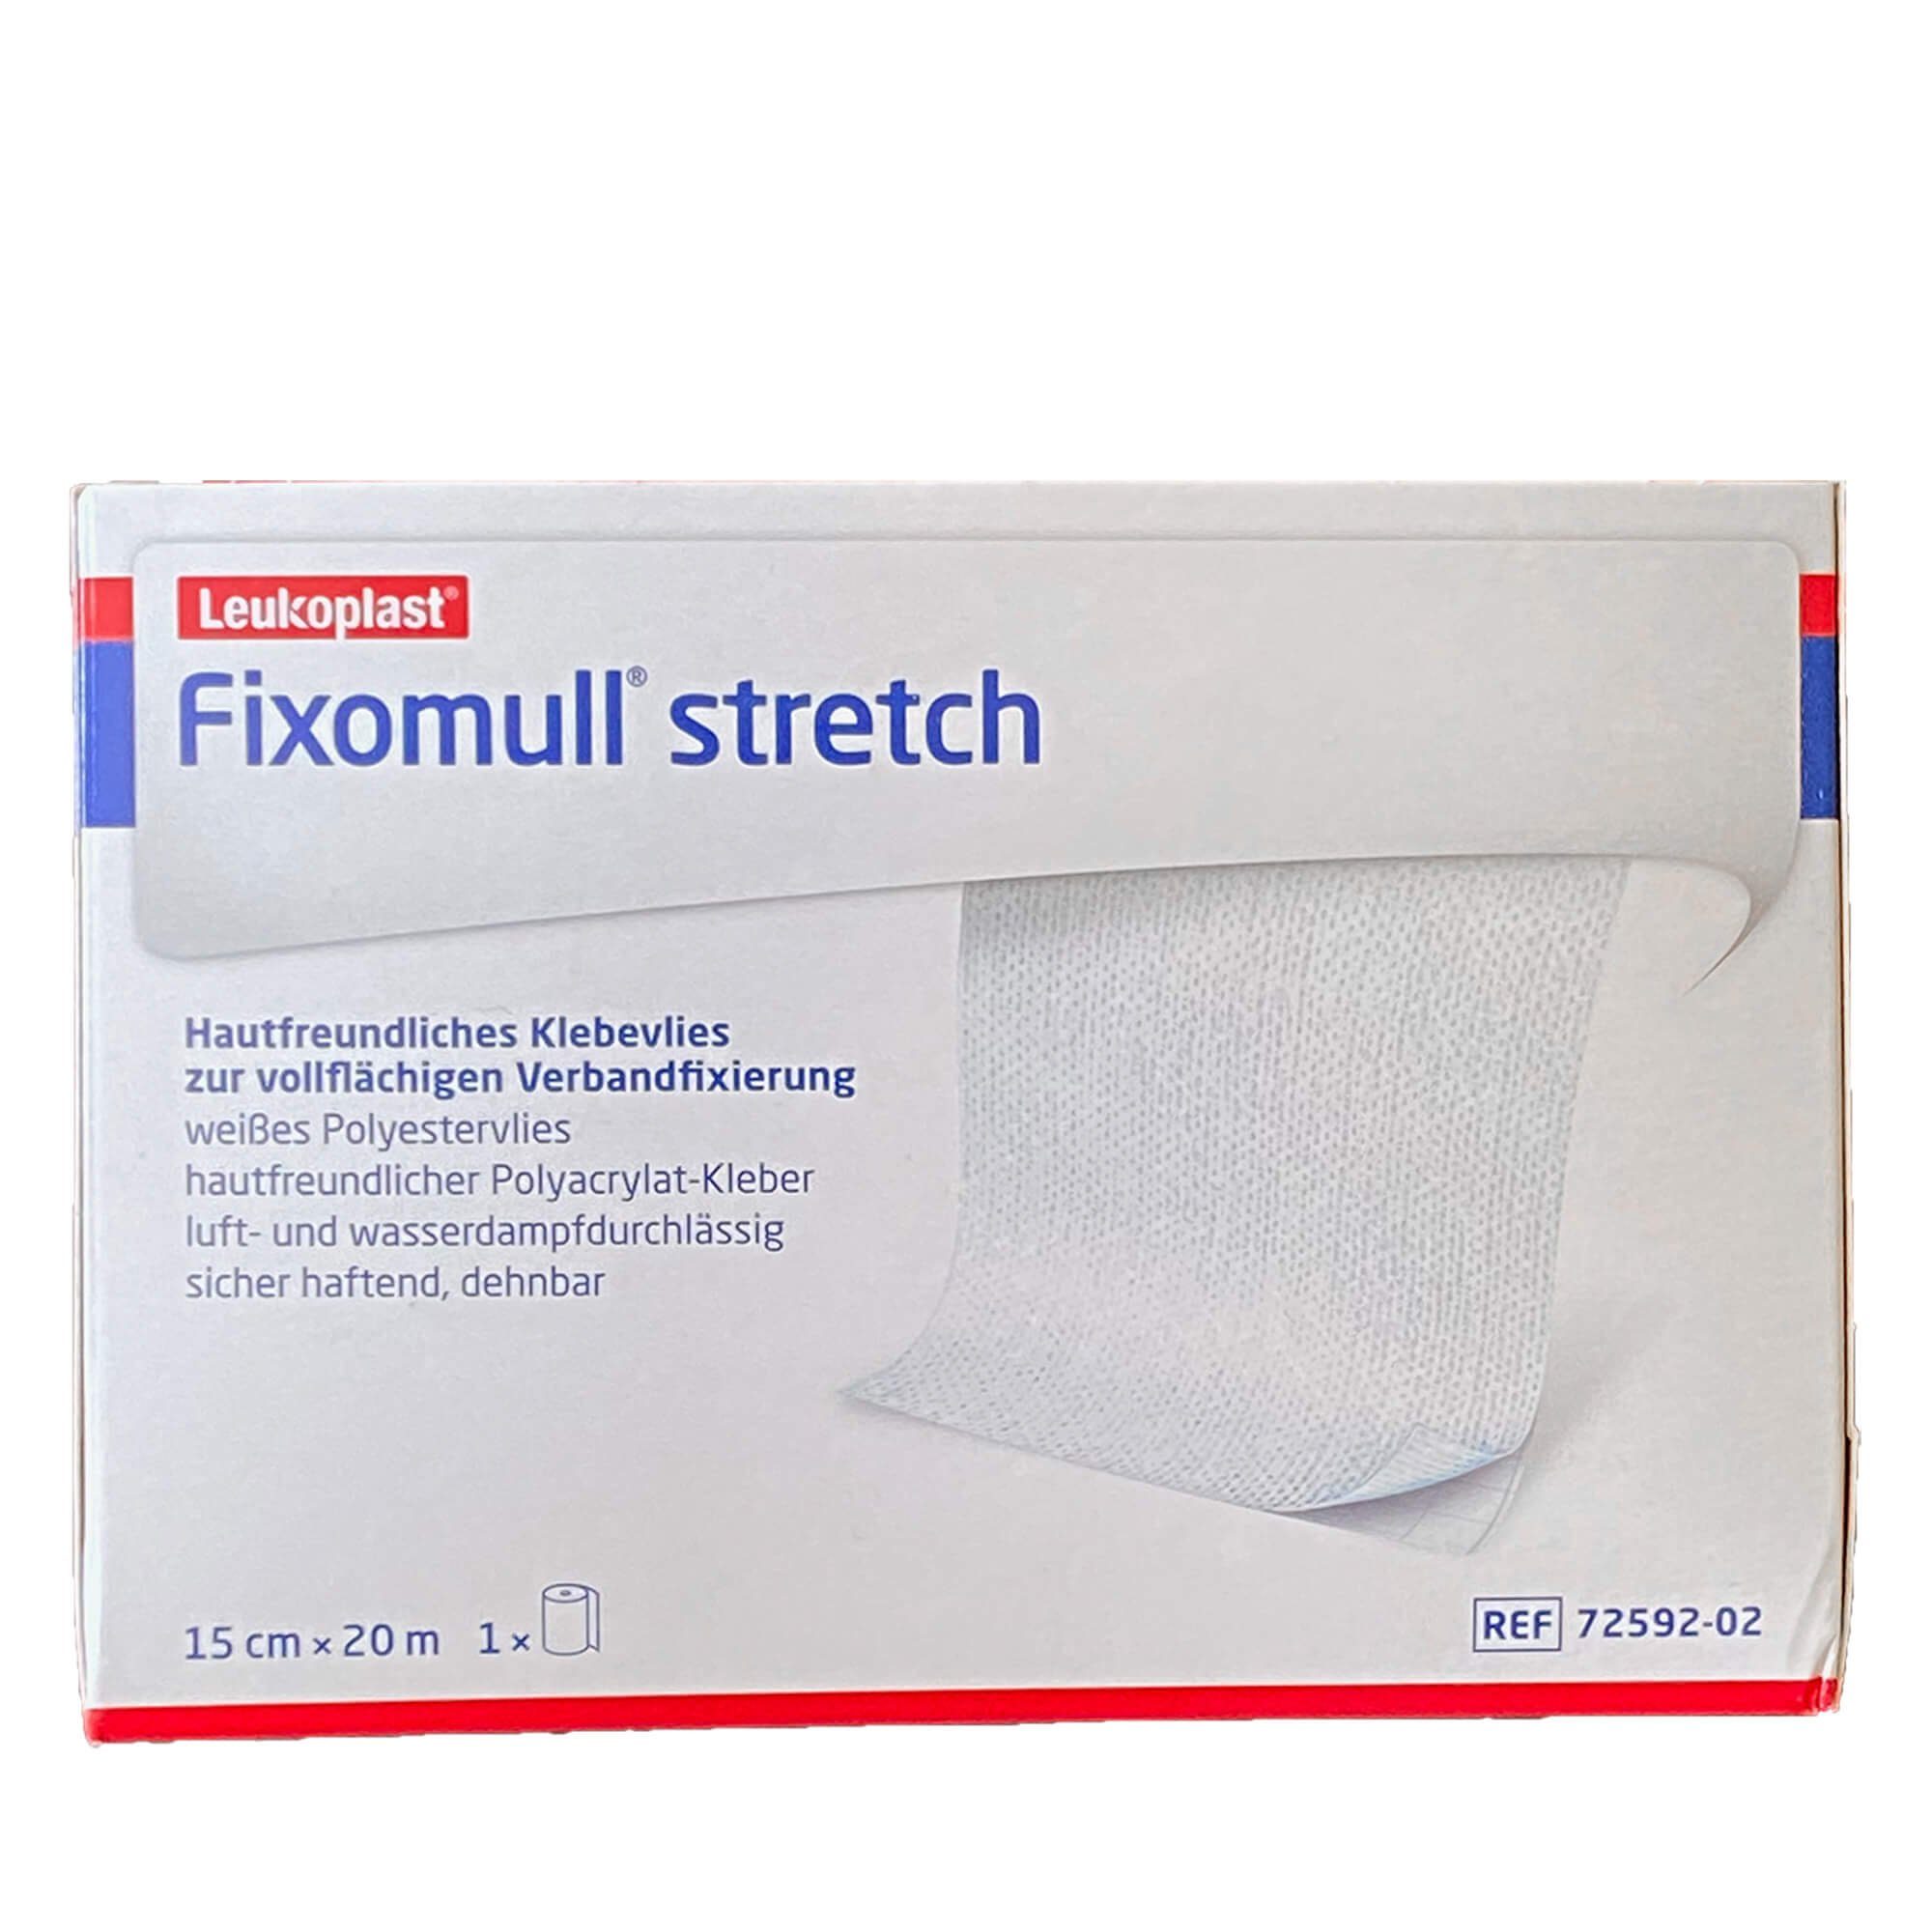 BSN medical GmbH Wundpflaster Fixomull stretch